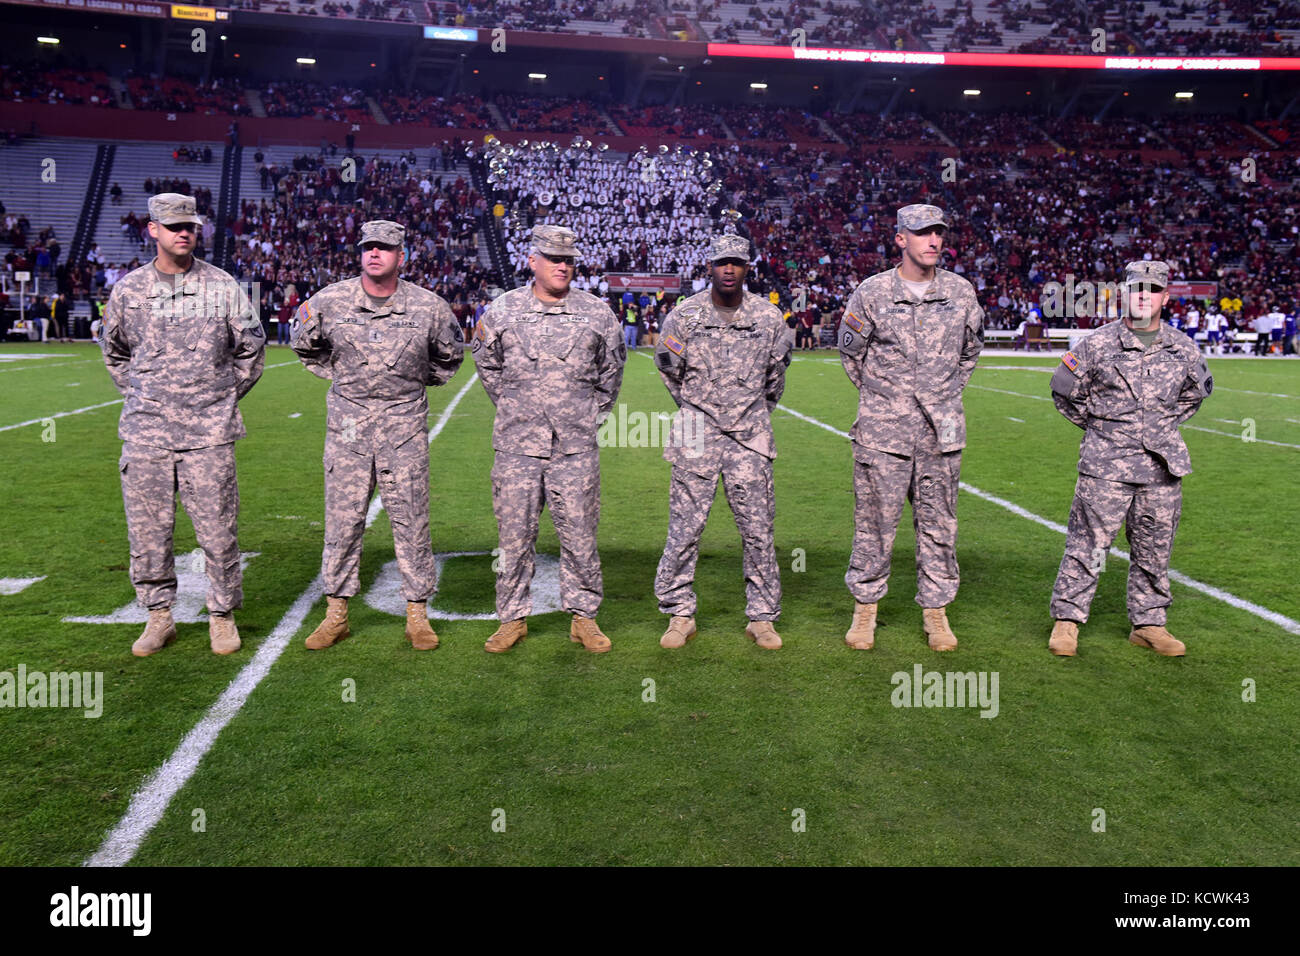 South Carolina Army National Guard AH-64 Apache helicopter pilots with the 1-151st Attack Reconnaissance Battalion at McEntire Joint National Guard Base, are recognized after a fly-over at Williams-Brice stadium in Columbia, South Carolina, Nov. 19, 2016. The South Carolina Army National Guard fly-over was in support of Fort Jackson's participation in the University of South Carolina's military appreciation game. (U.S. Air National Guard photo by Airman 1st Class Megan Floyd) Stock Photo